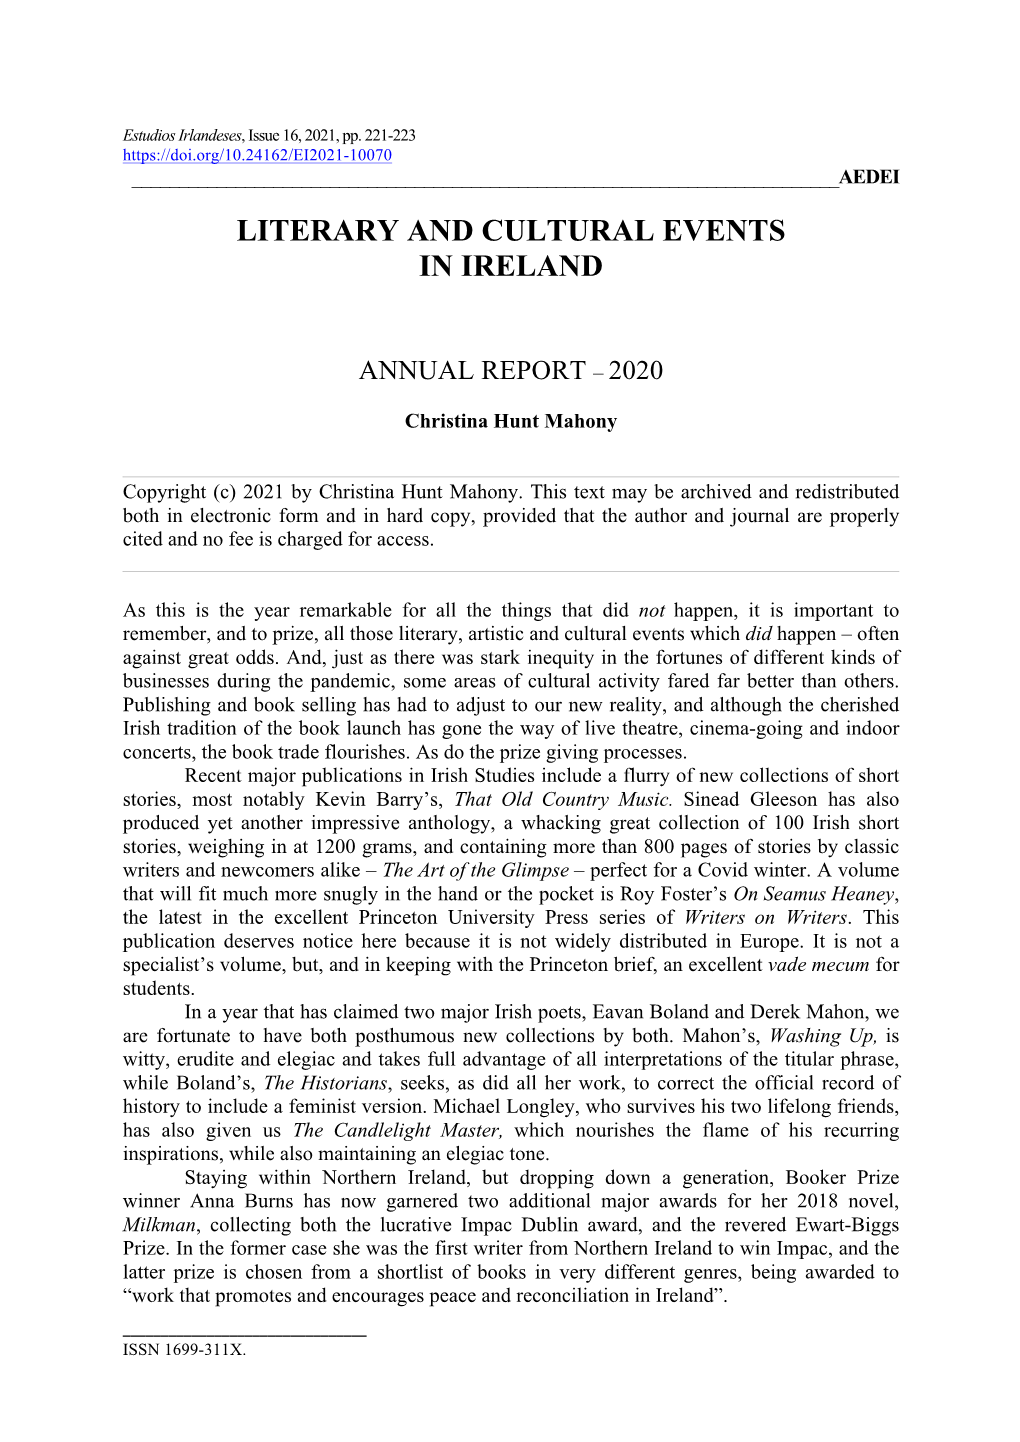 Literary and Cultural Events in Ireland